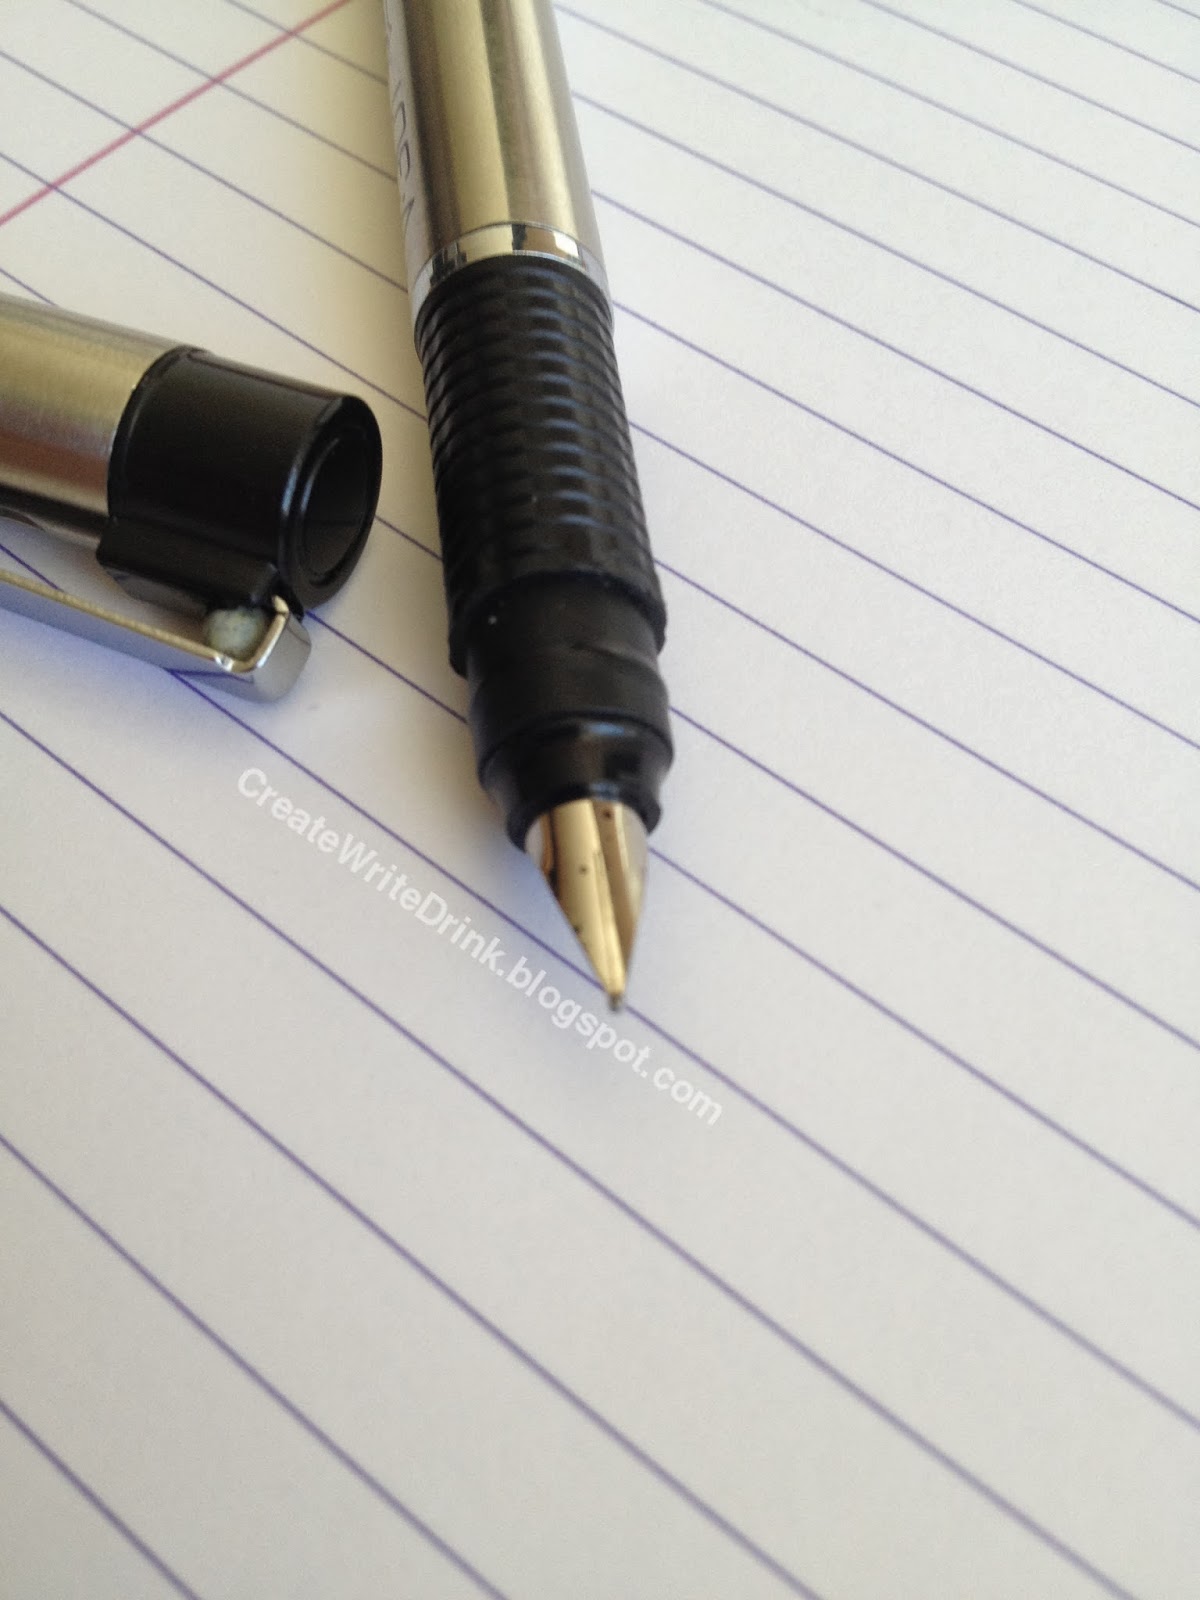 Built From Ink And Tea: A Review Of The Zebra V-301, 45% OFF